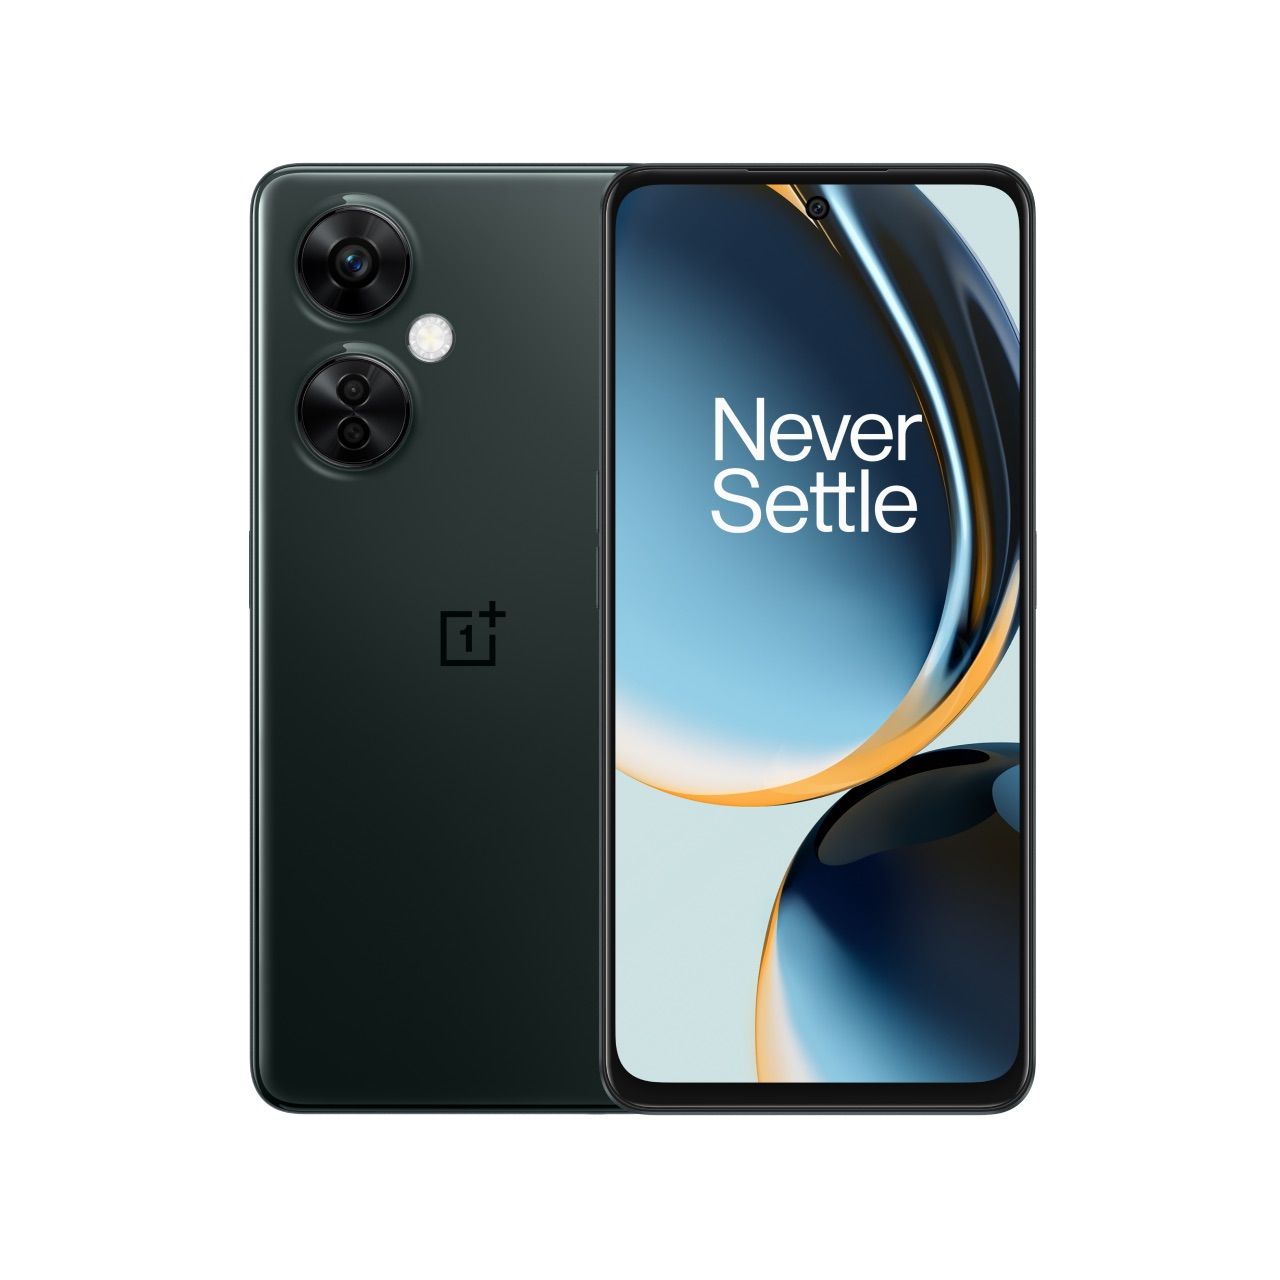 OnePlus 8T vs OnePlus Nord: Is it worth the extra money?